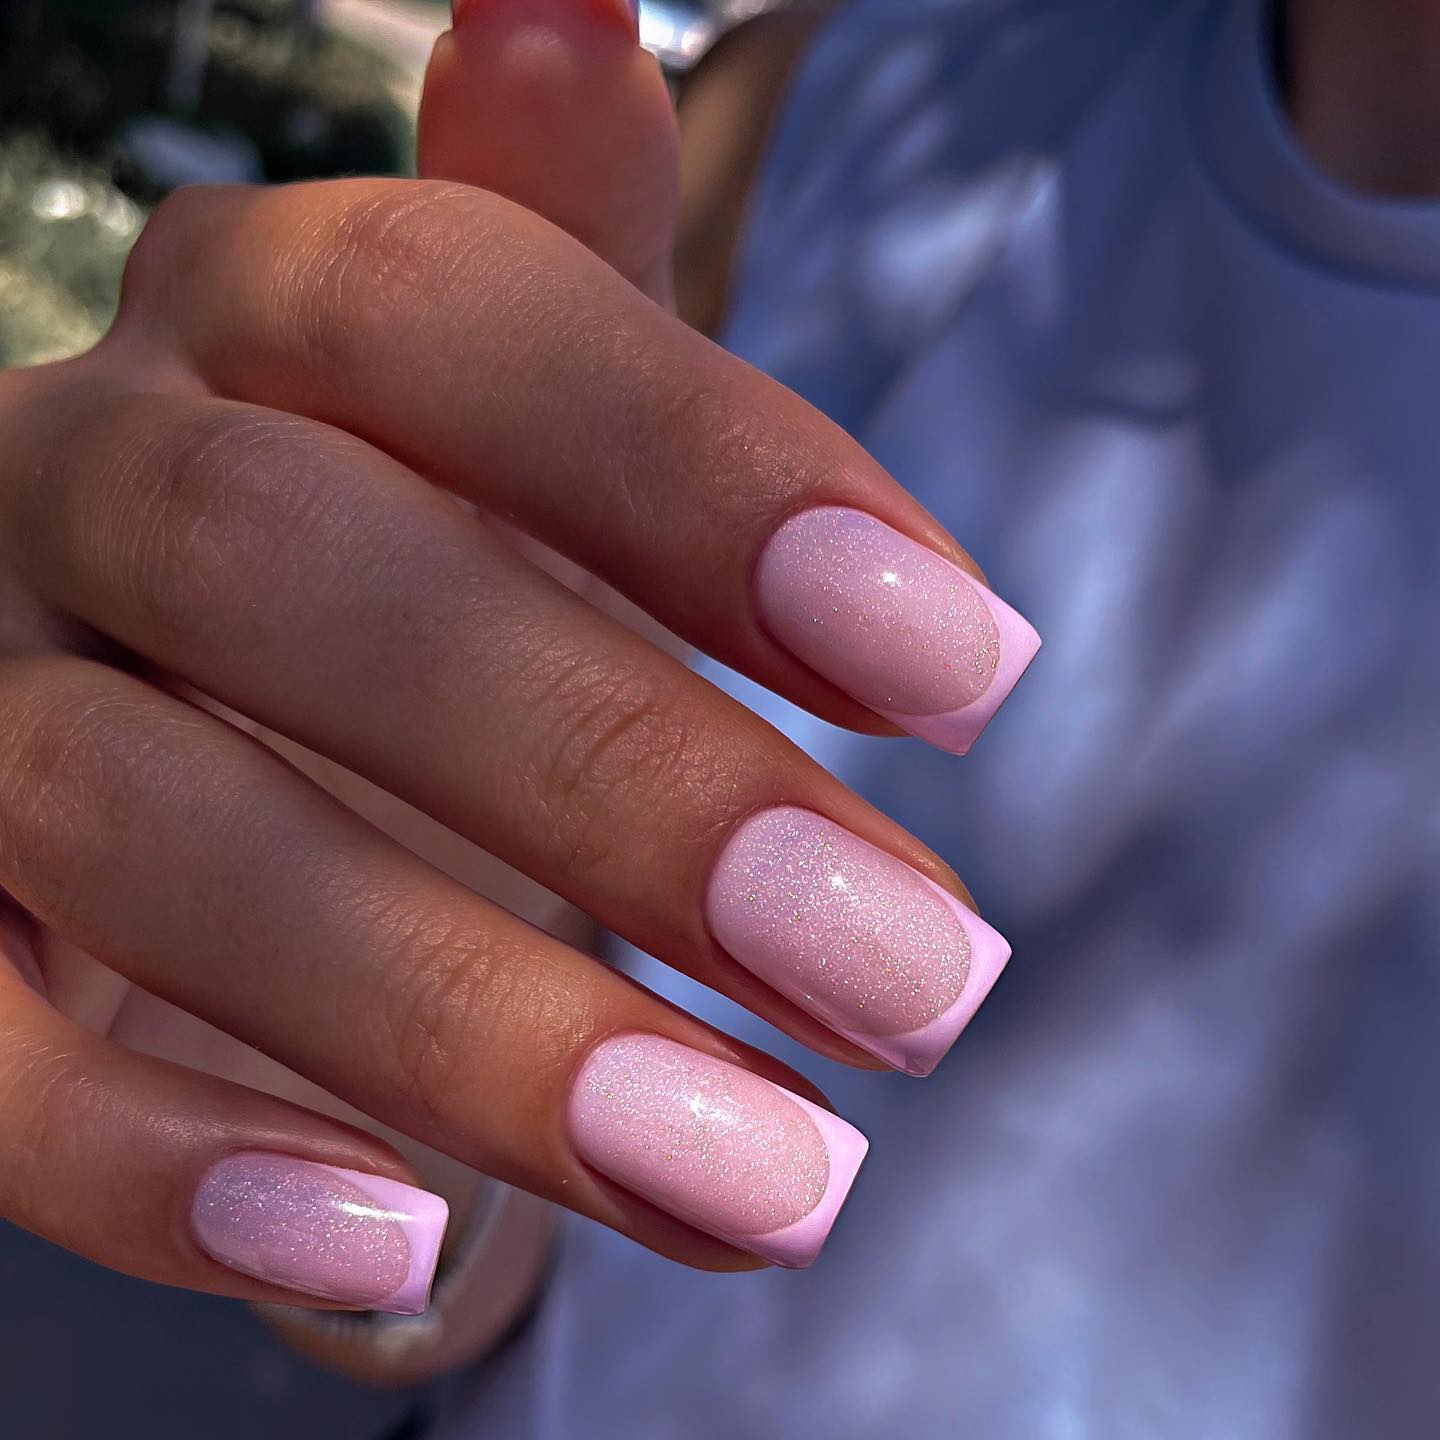 Want a bit of a different manicure? This one has a pink shimmery and glittery base, along with a subtle pink French nail tip. It is a bit different, yet so Barbie-like!